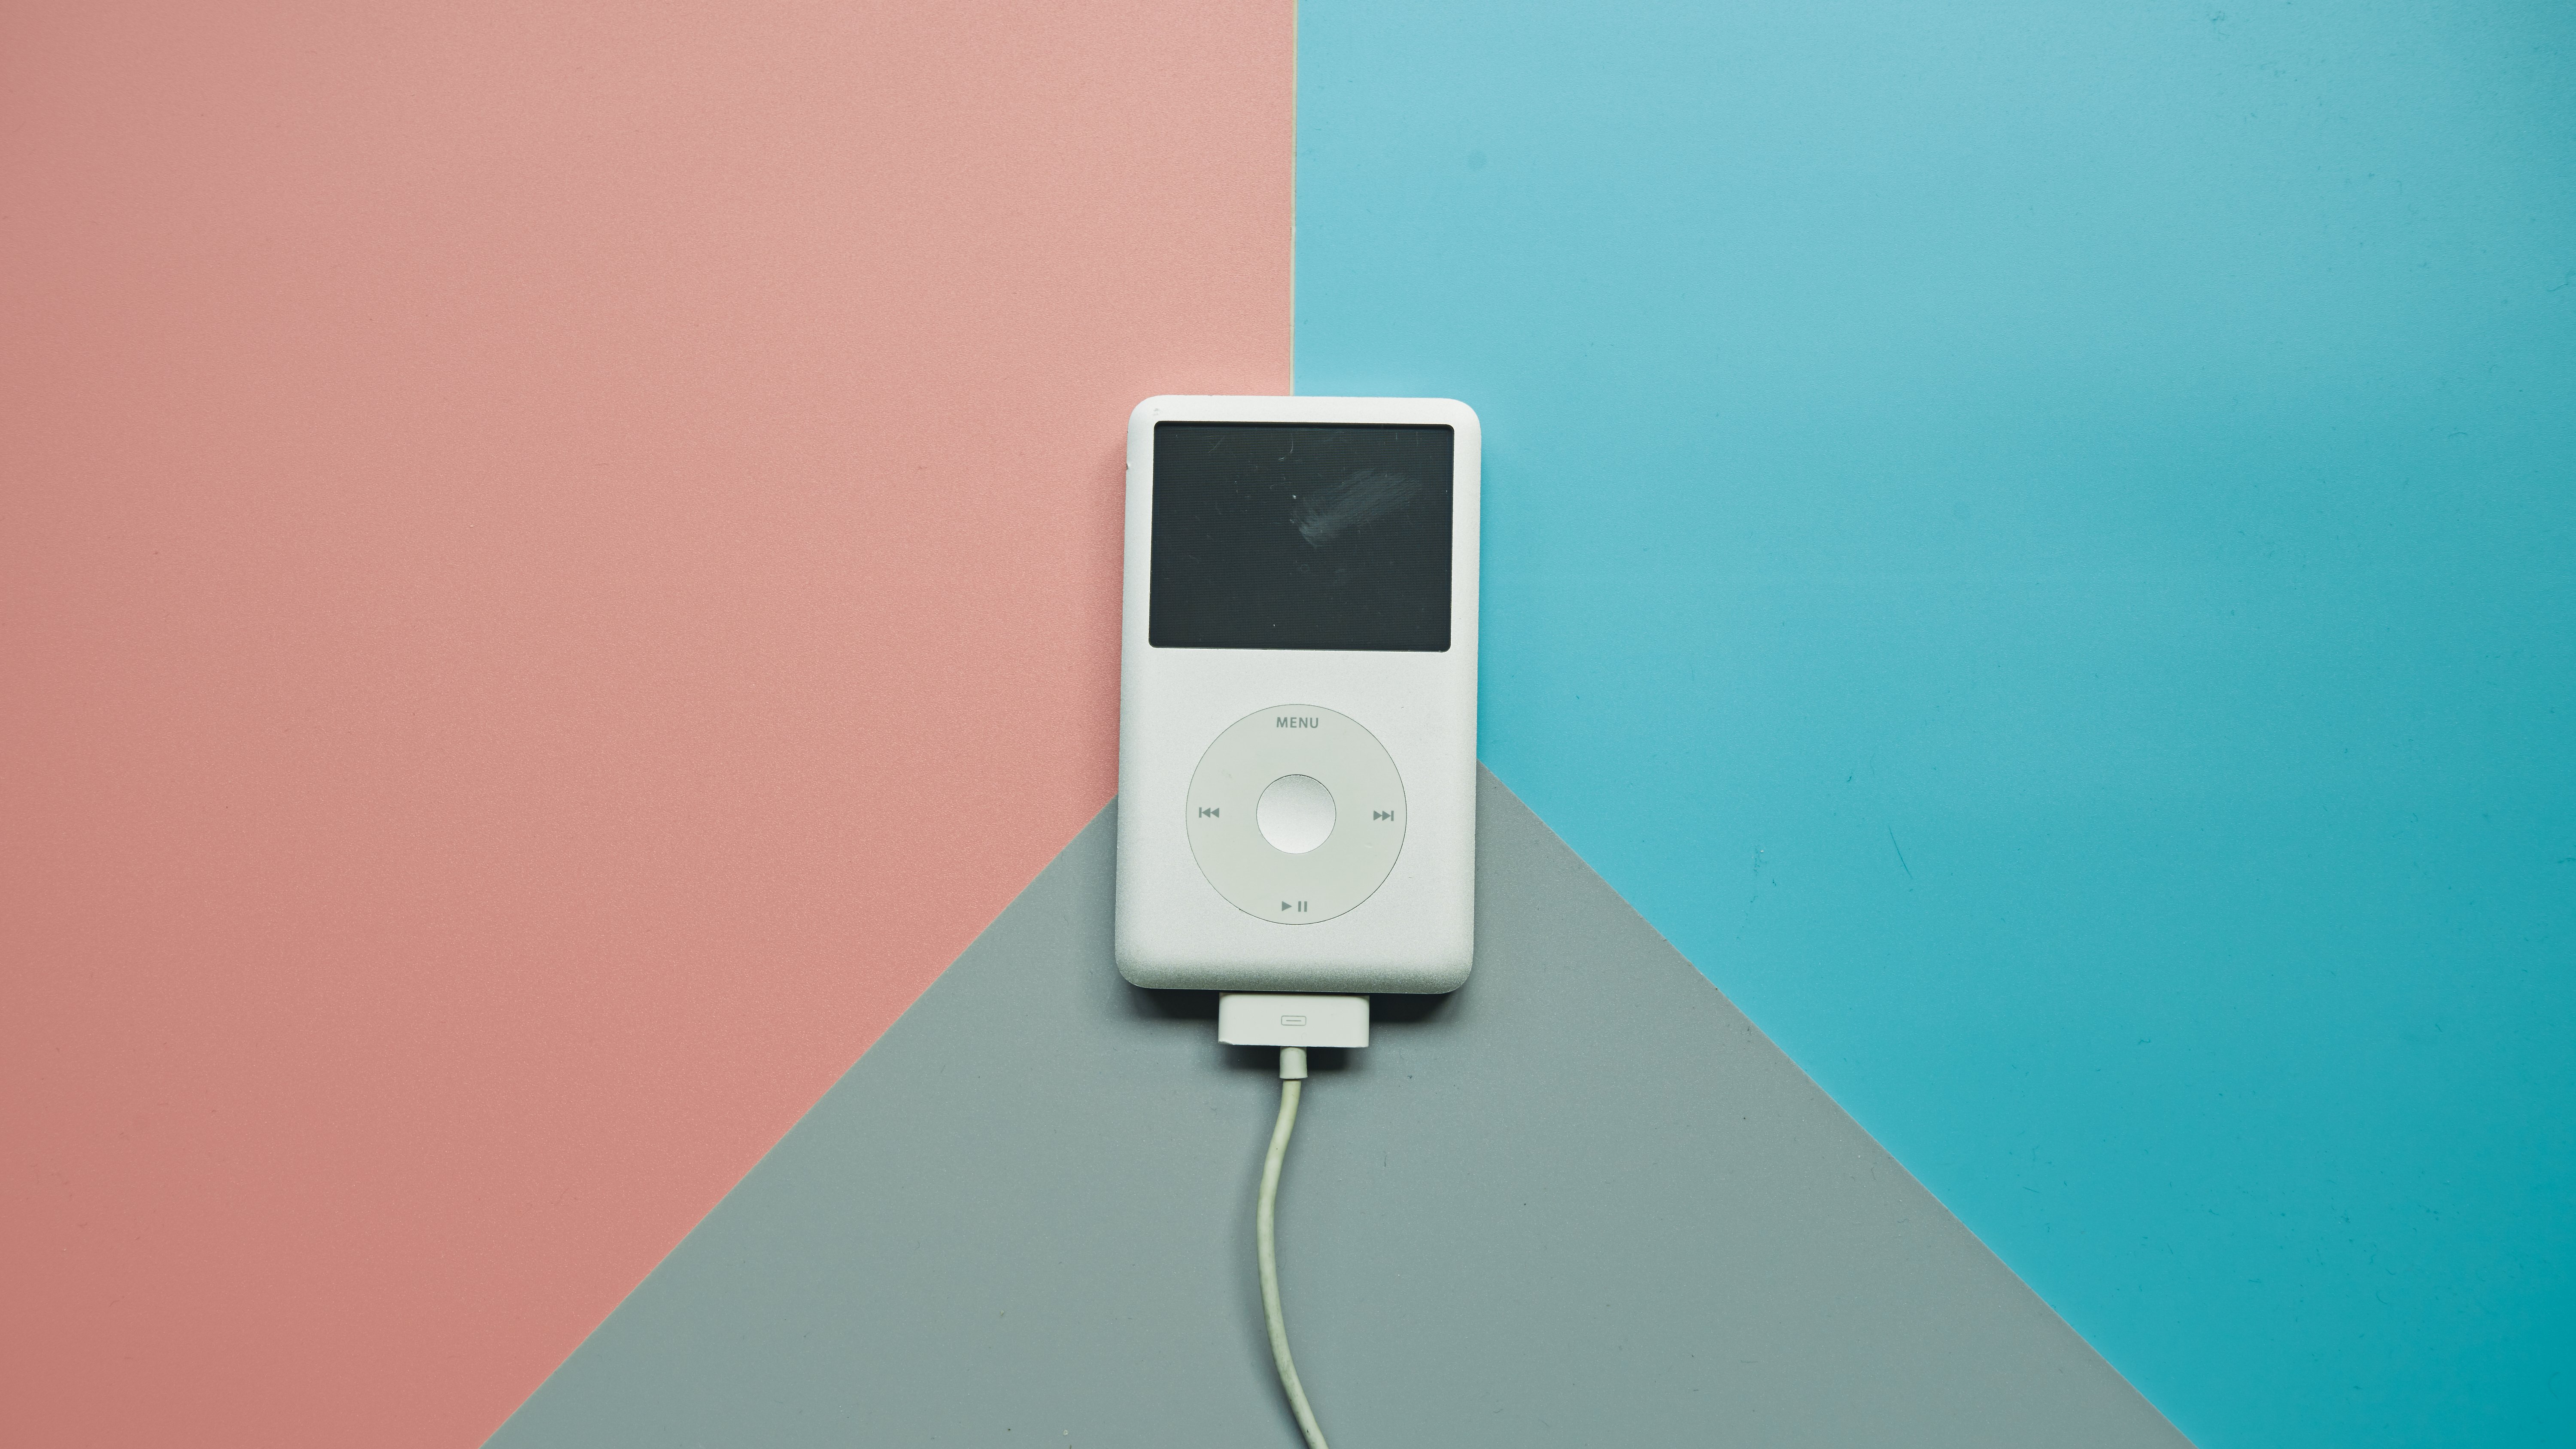 Image of iPod classic against a pink and blue geometric background.